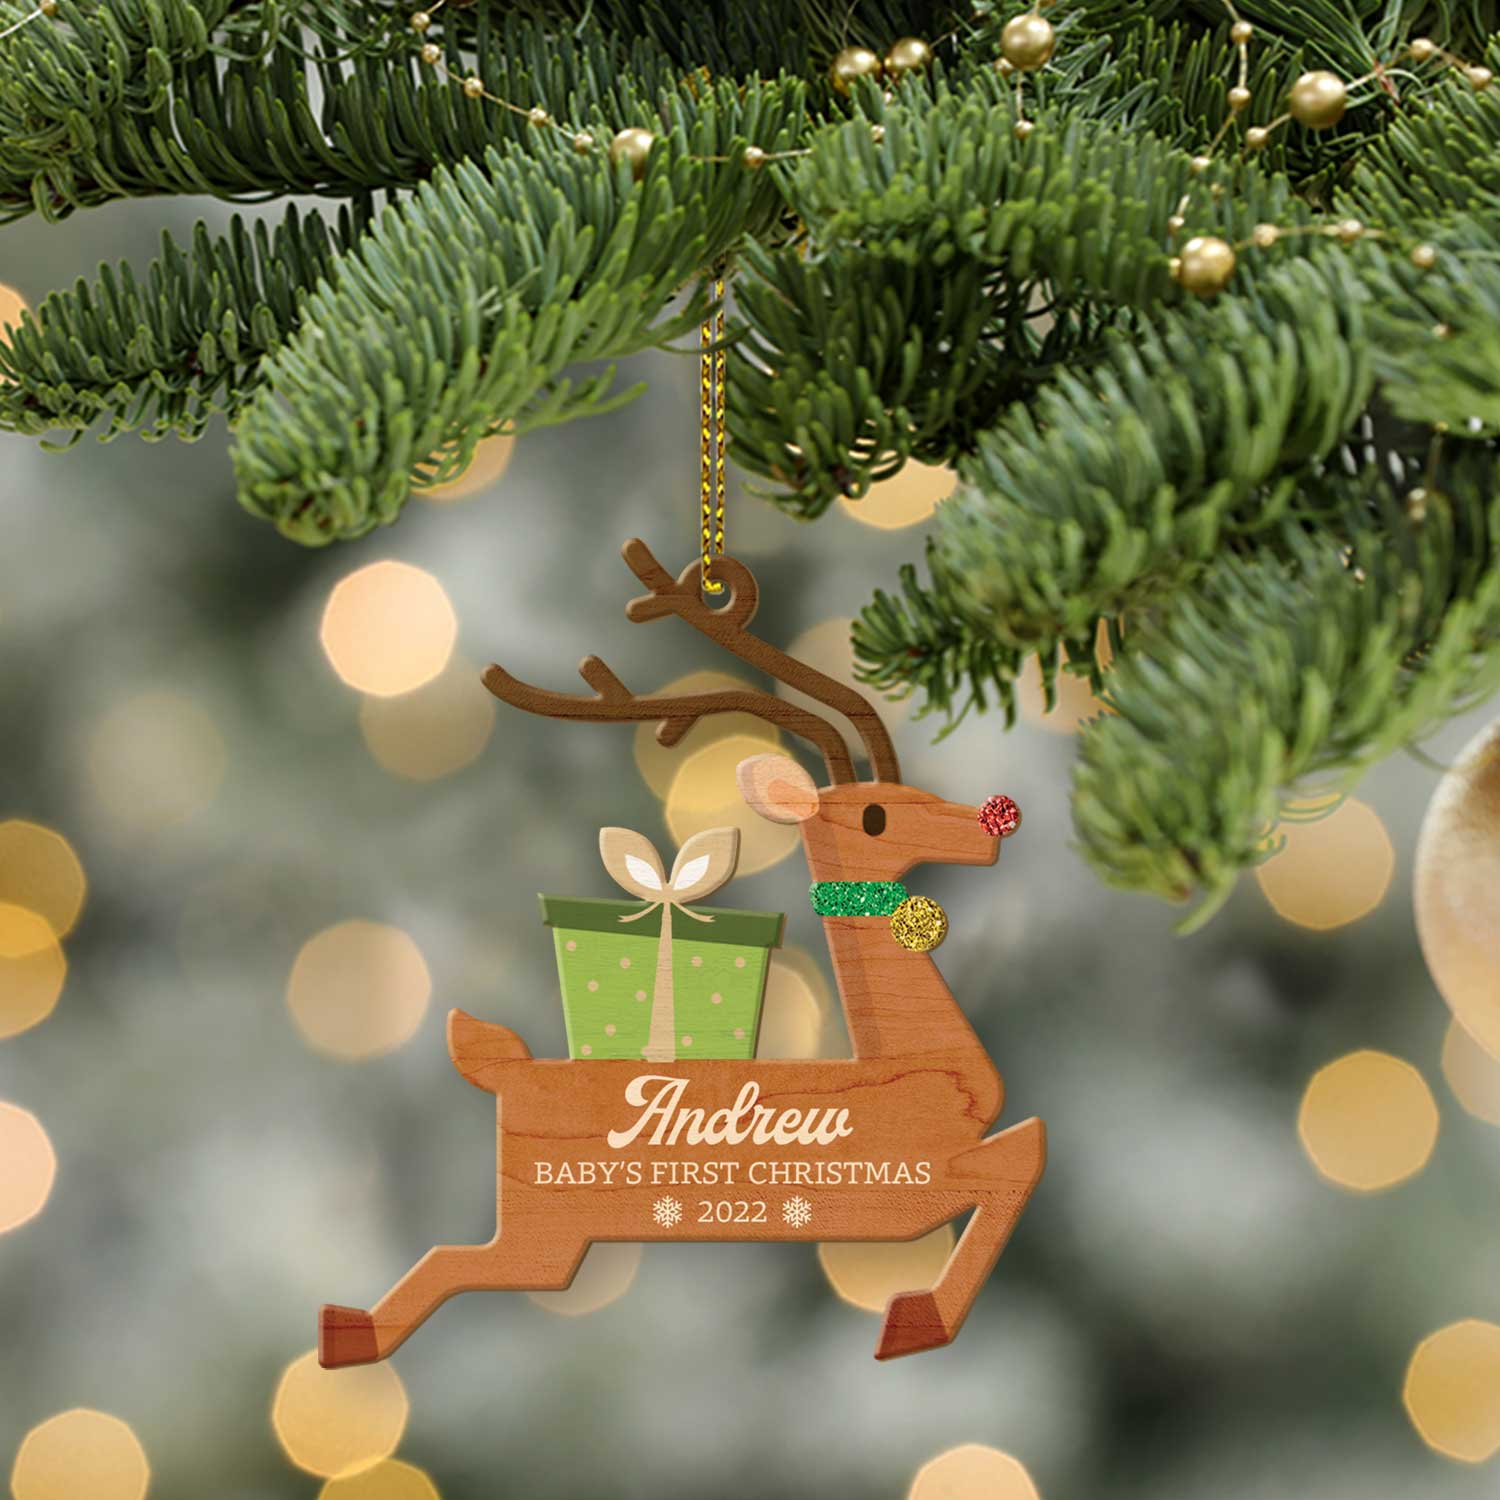 Personalized Name And Photo, Ornament For Baby, Baby's First Christmas, Reindeer, Christmas Shape Ornament 2 Sides